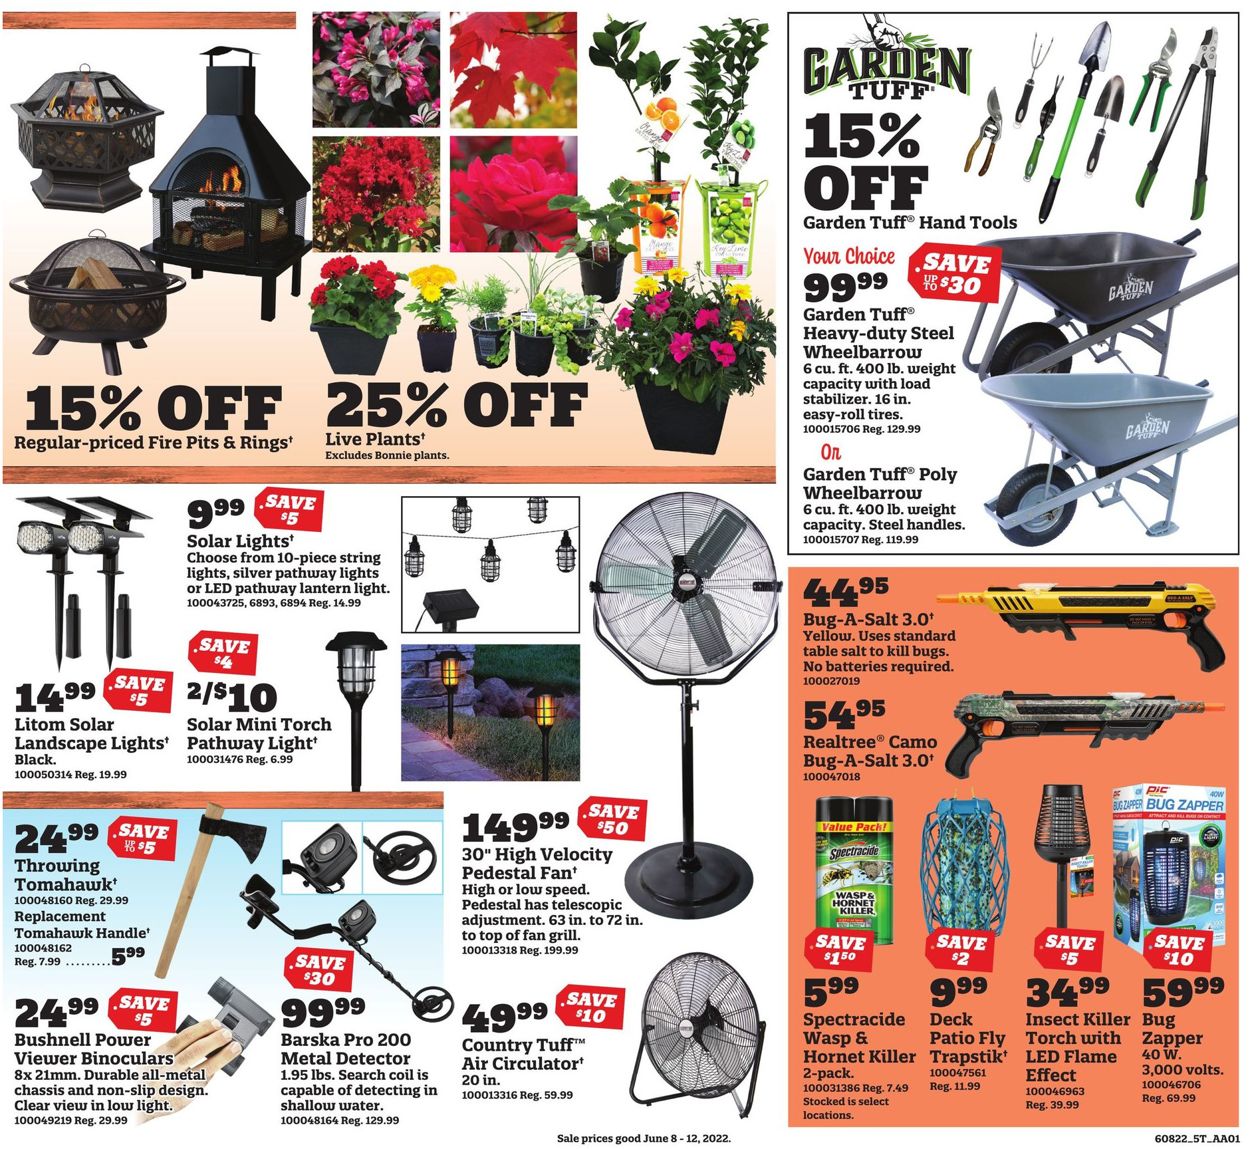 Orscheln Farm and Home Ad from 06/08/2022